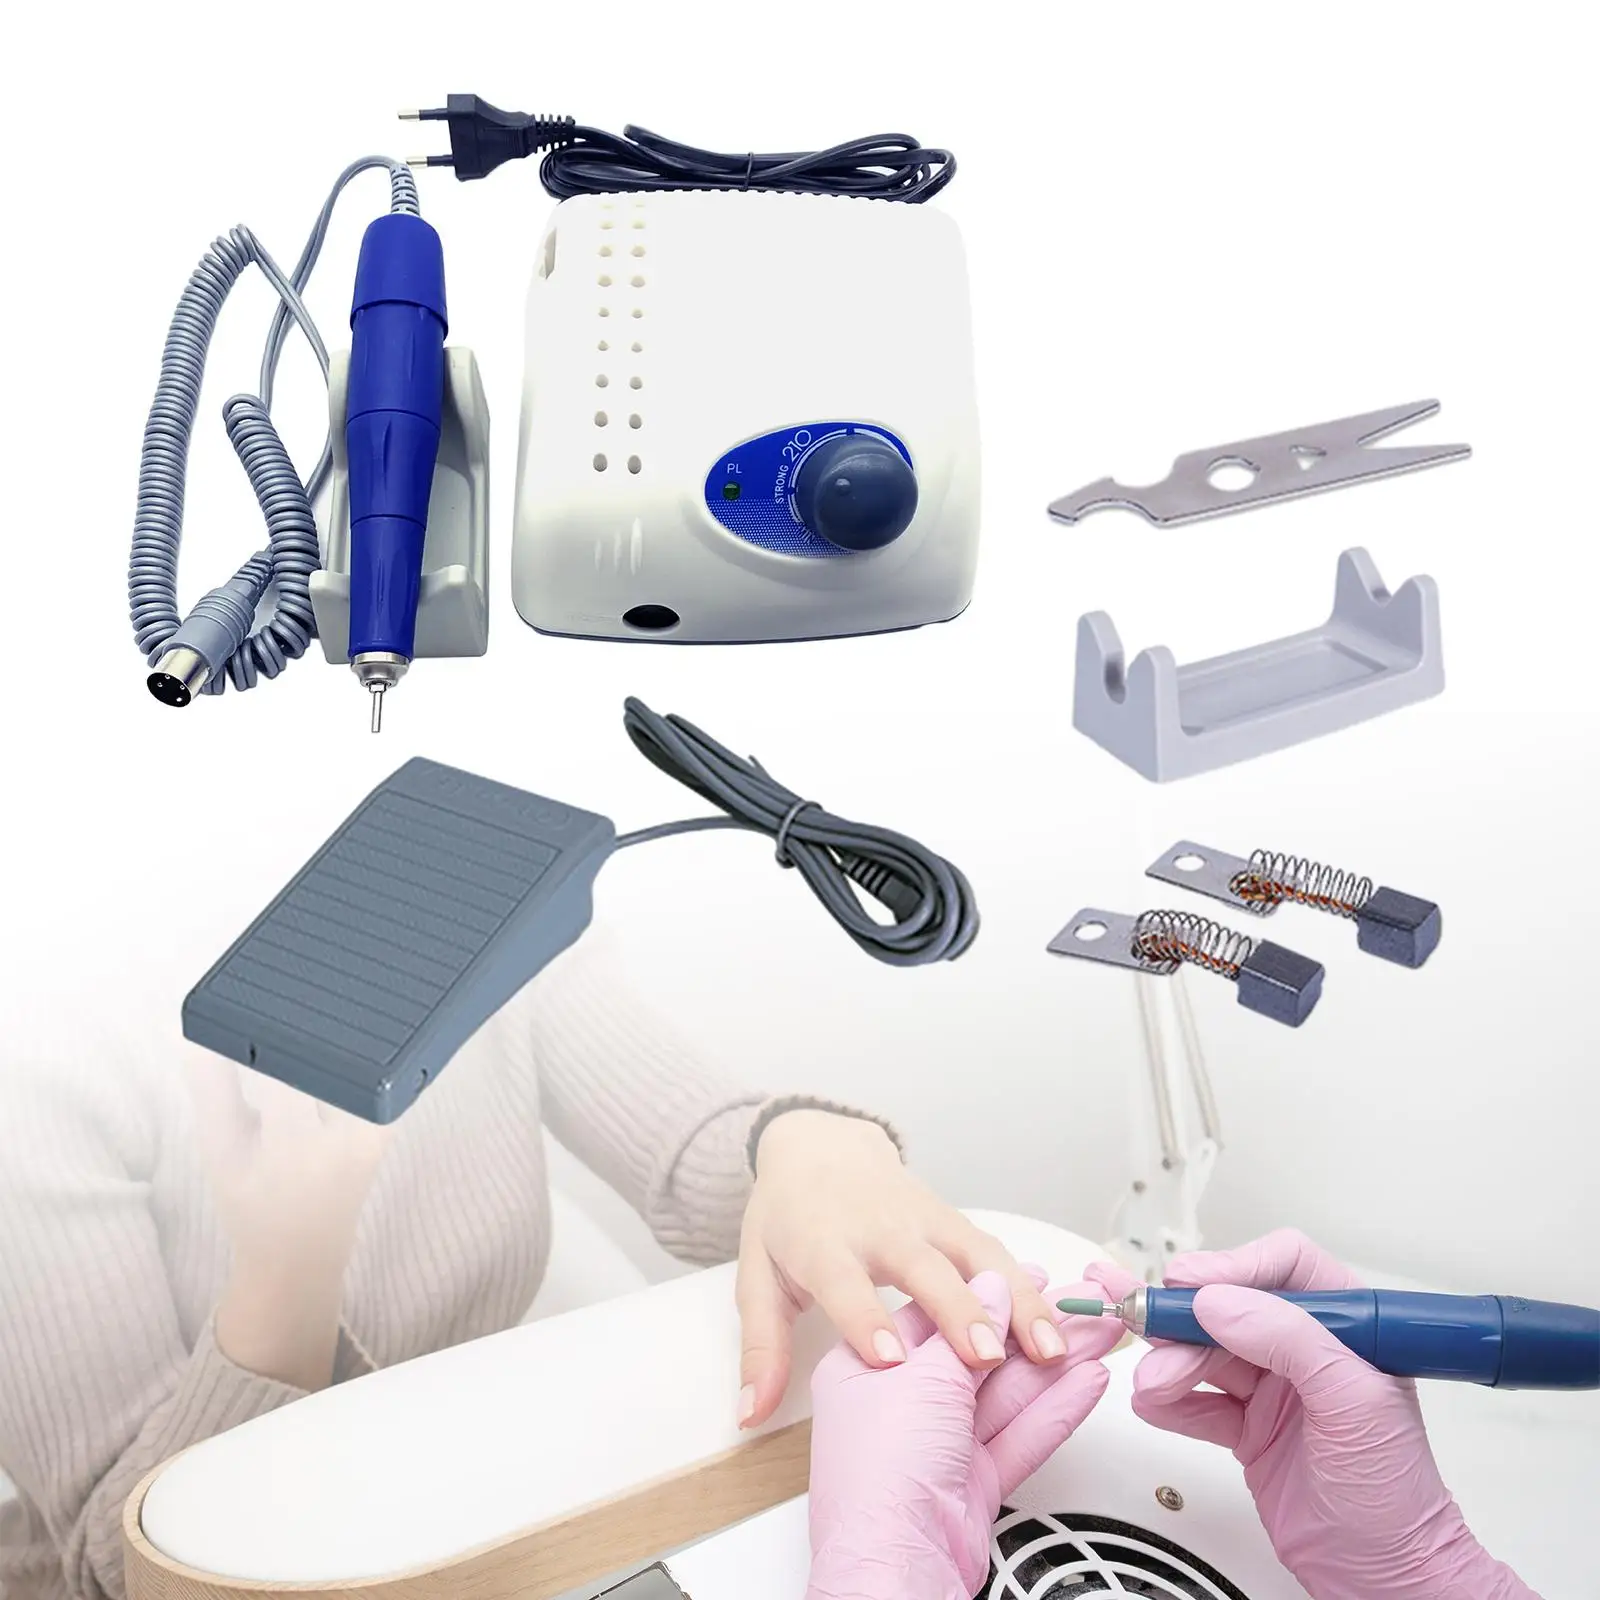 Electric Nail File Drill Machine Multifunction Portable for Acrylic Nails Manicure Pedicure Tool for Nail File Shaping Buffing